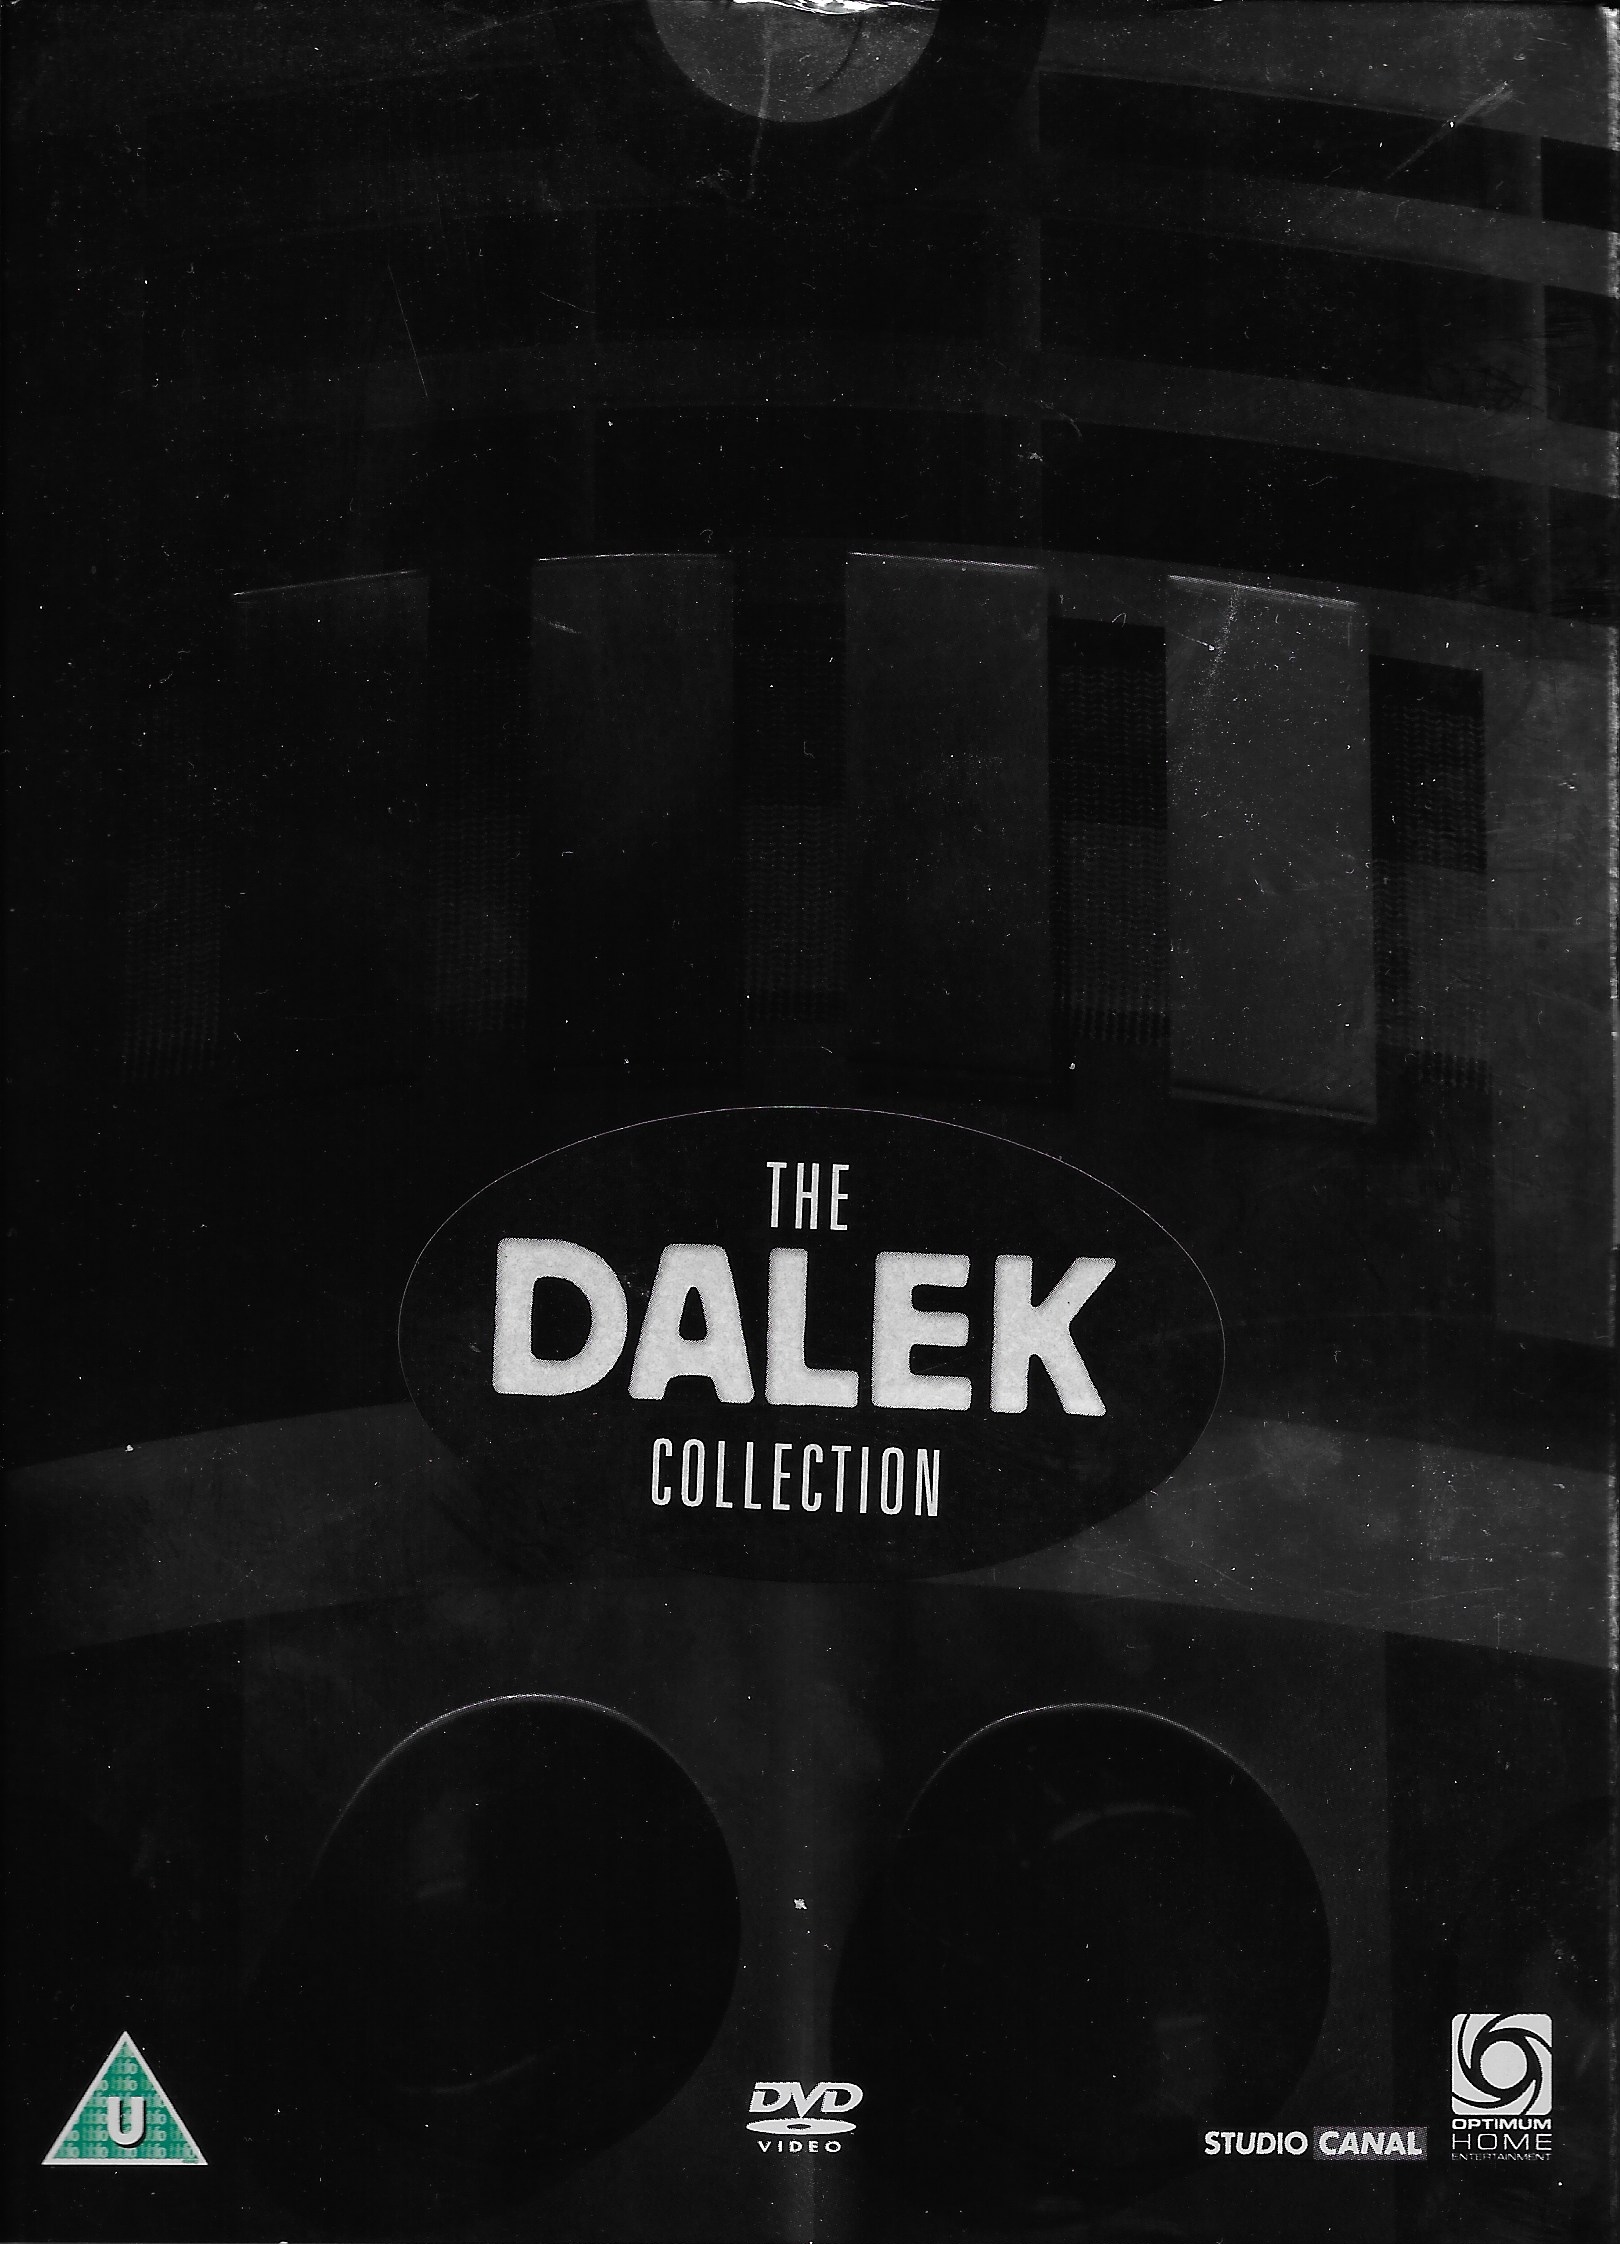 Picture of OPTD 0591 The Dalek Collection by artist Milton Subotsky from the BBC records and Tapes library